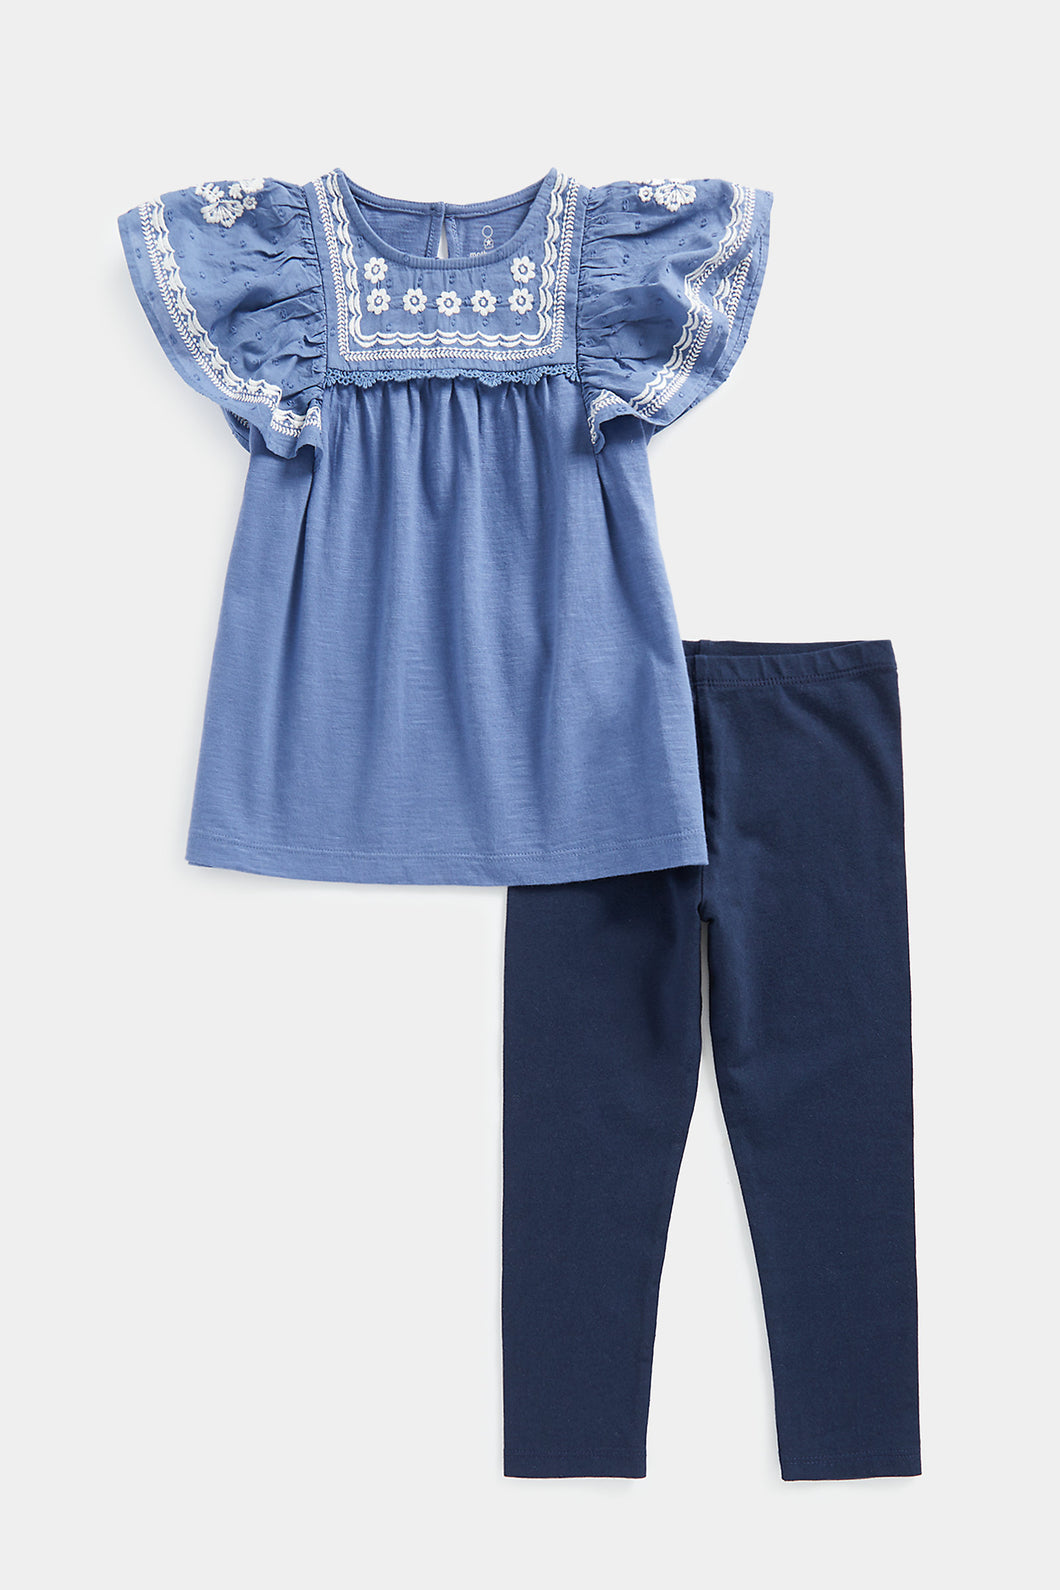 Mothercare Blue Top and Leggings Set